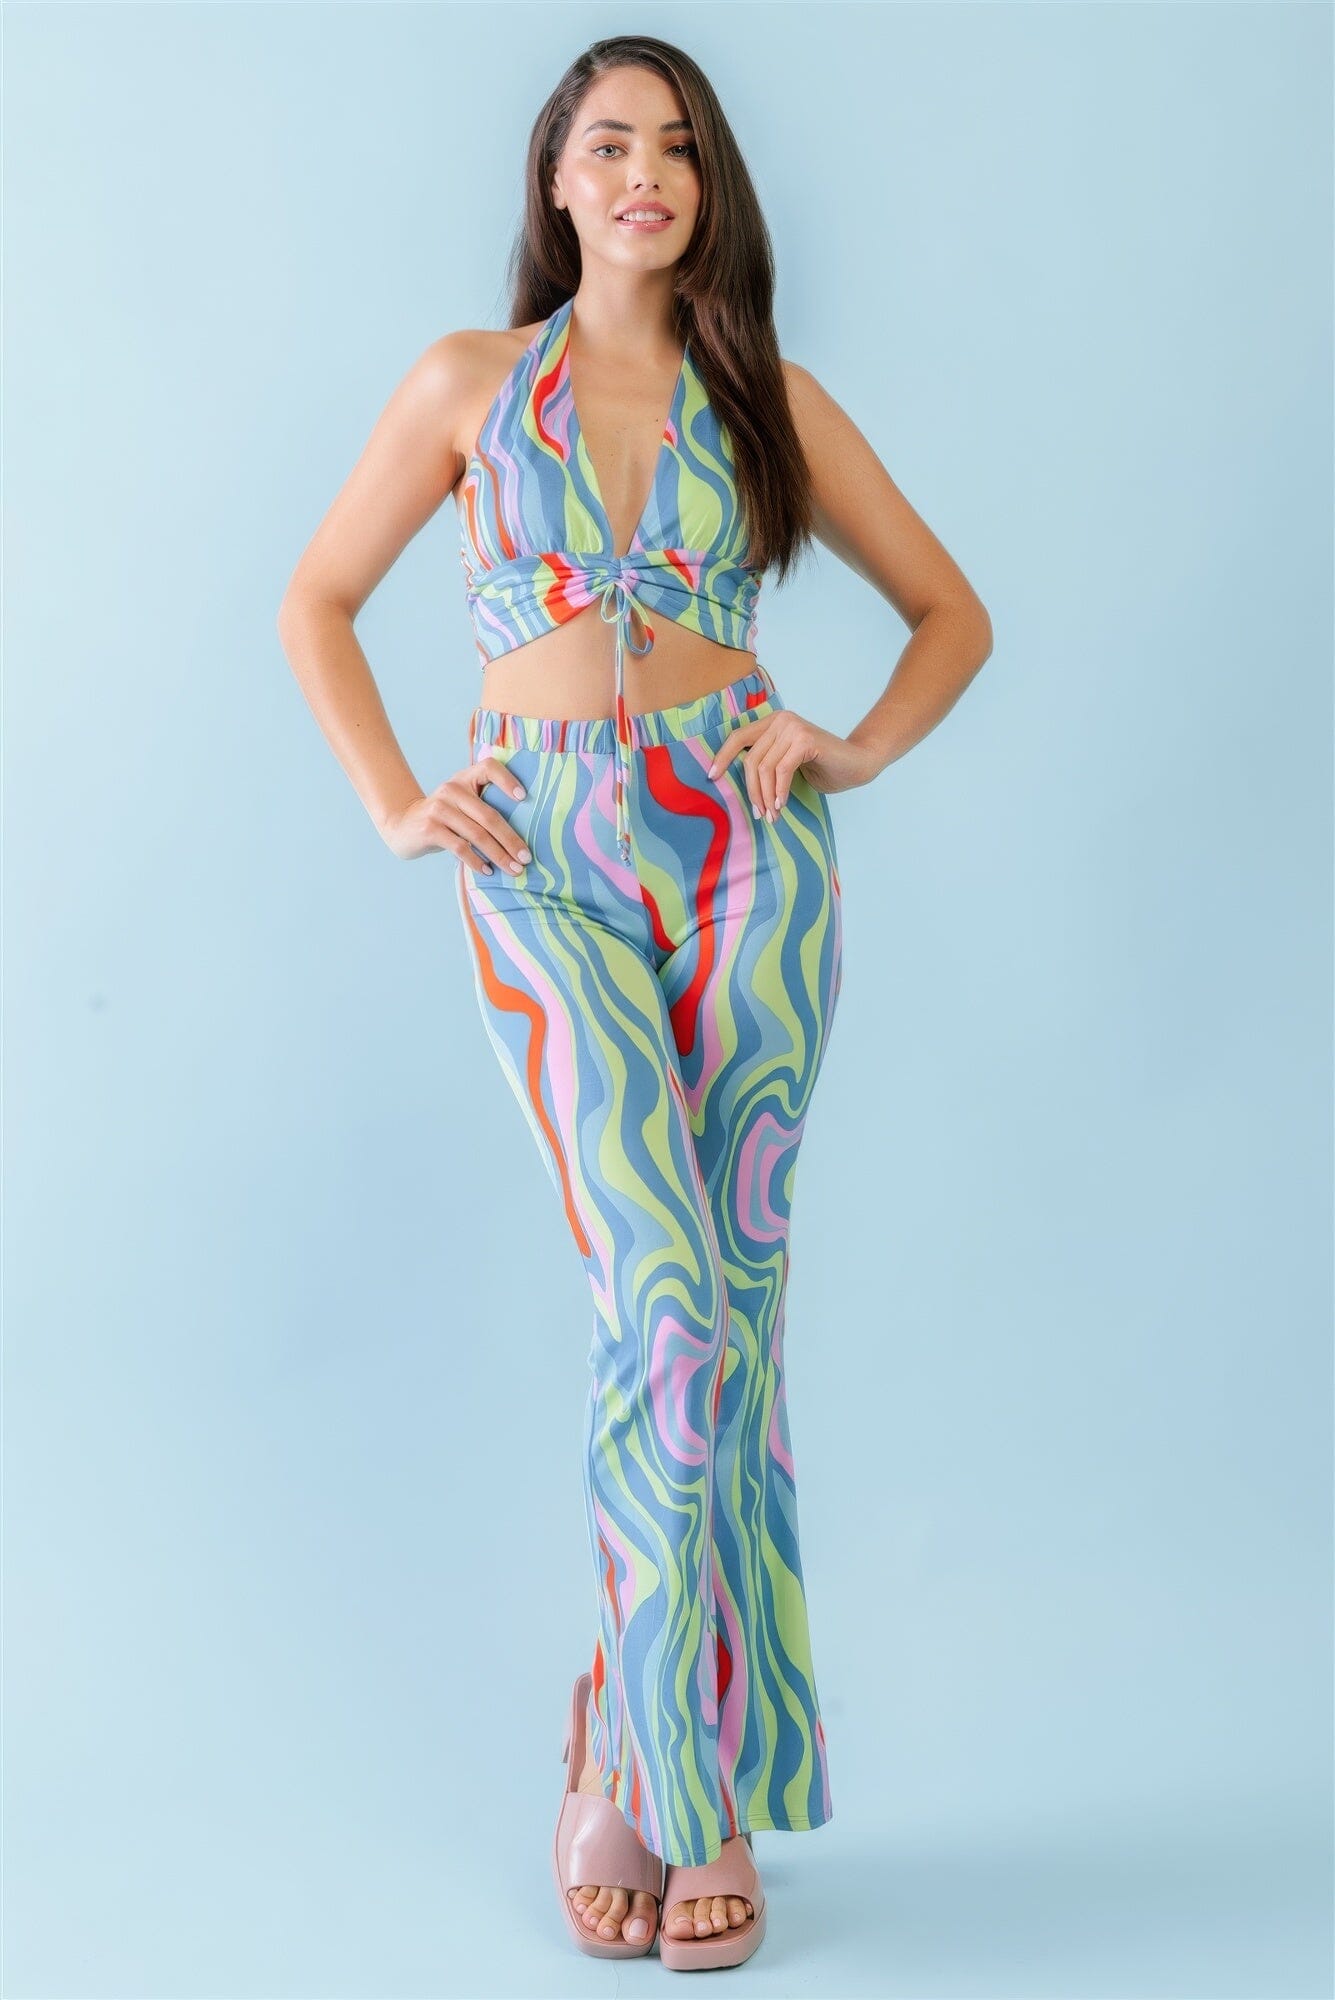 Multicolor Abstract Print Halter V-neck Ruched Open Back Crop Top & High Waist Pants Outfit Set Outfit Sets jehouze S 